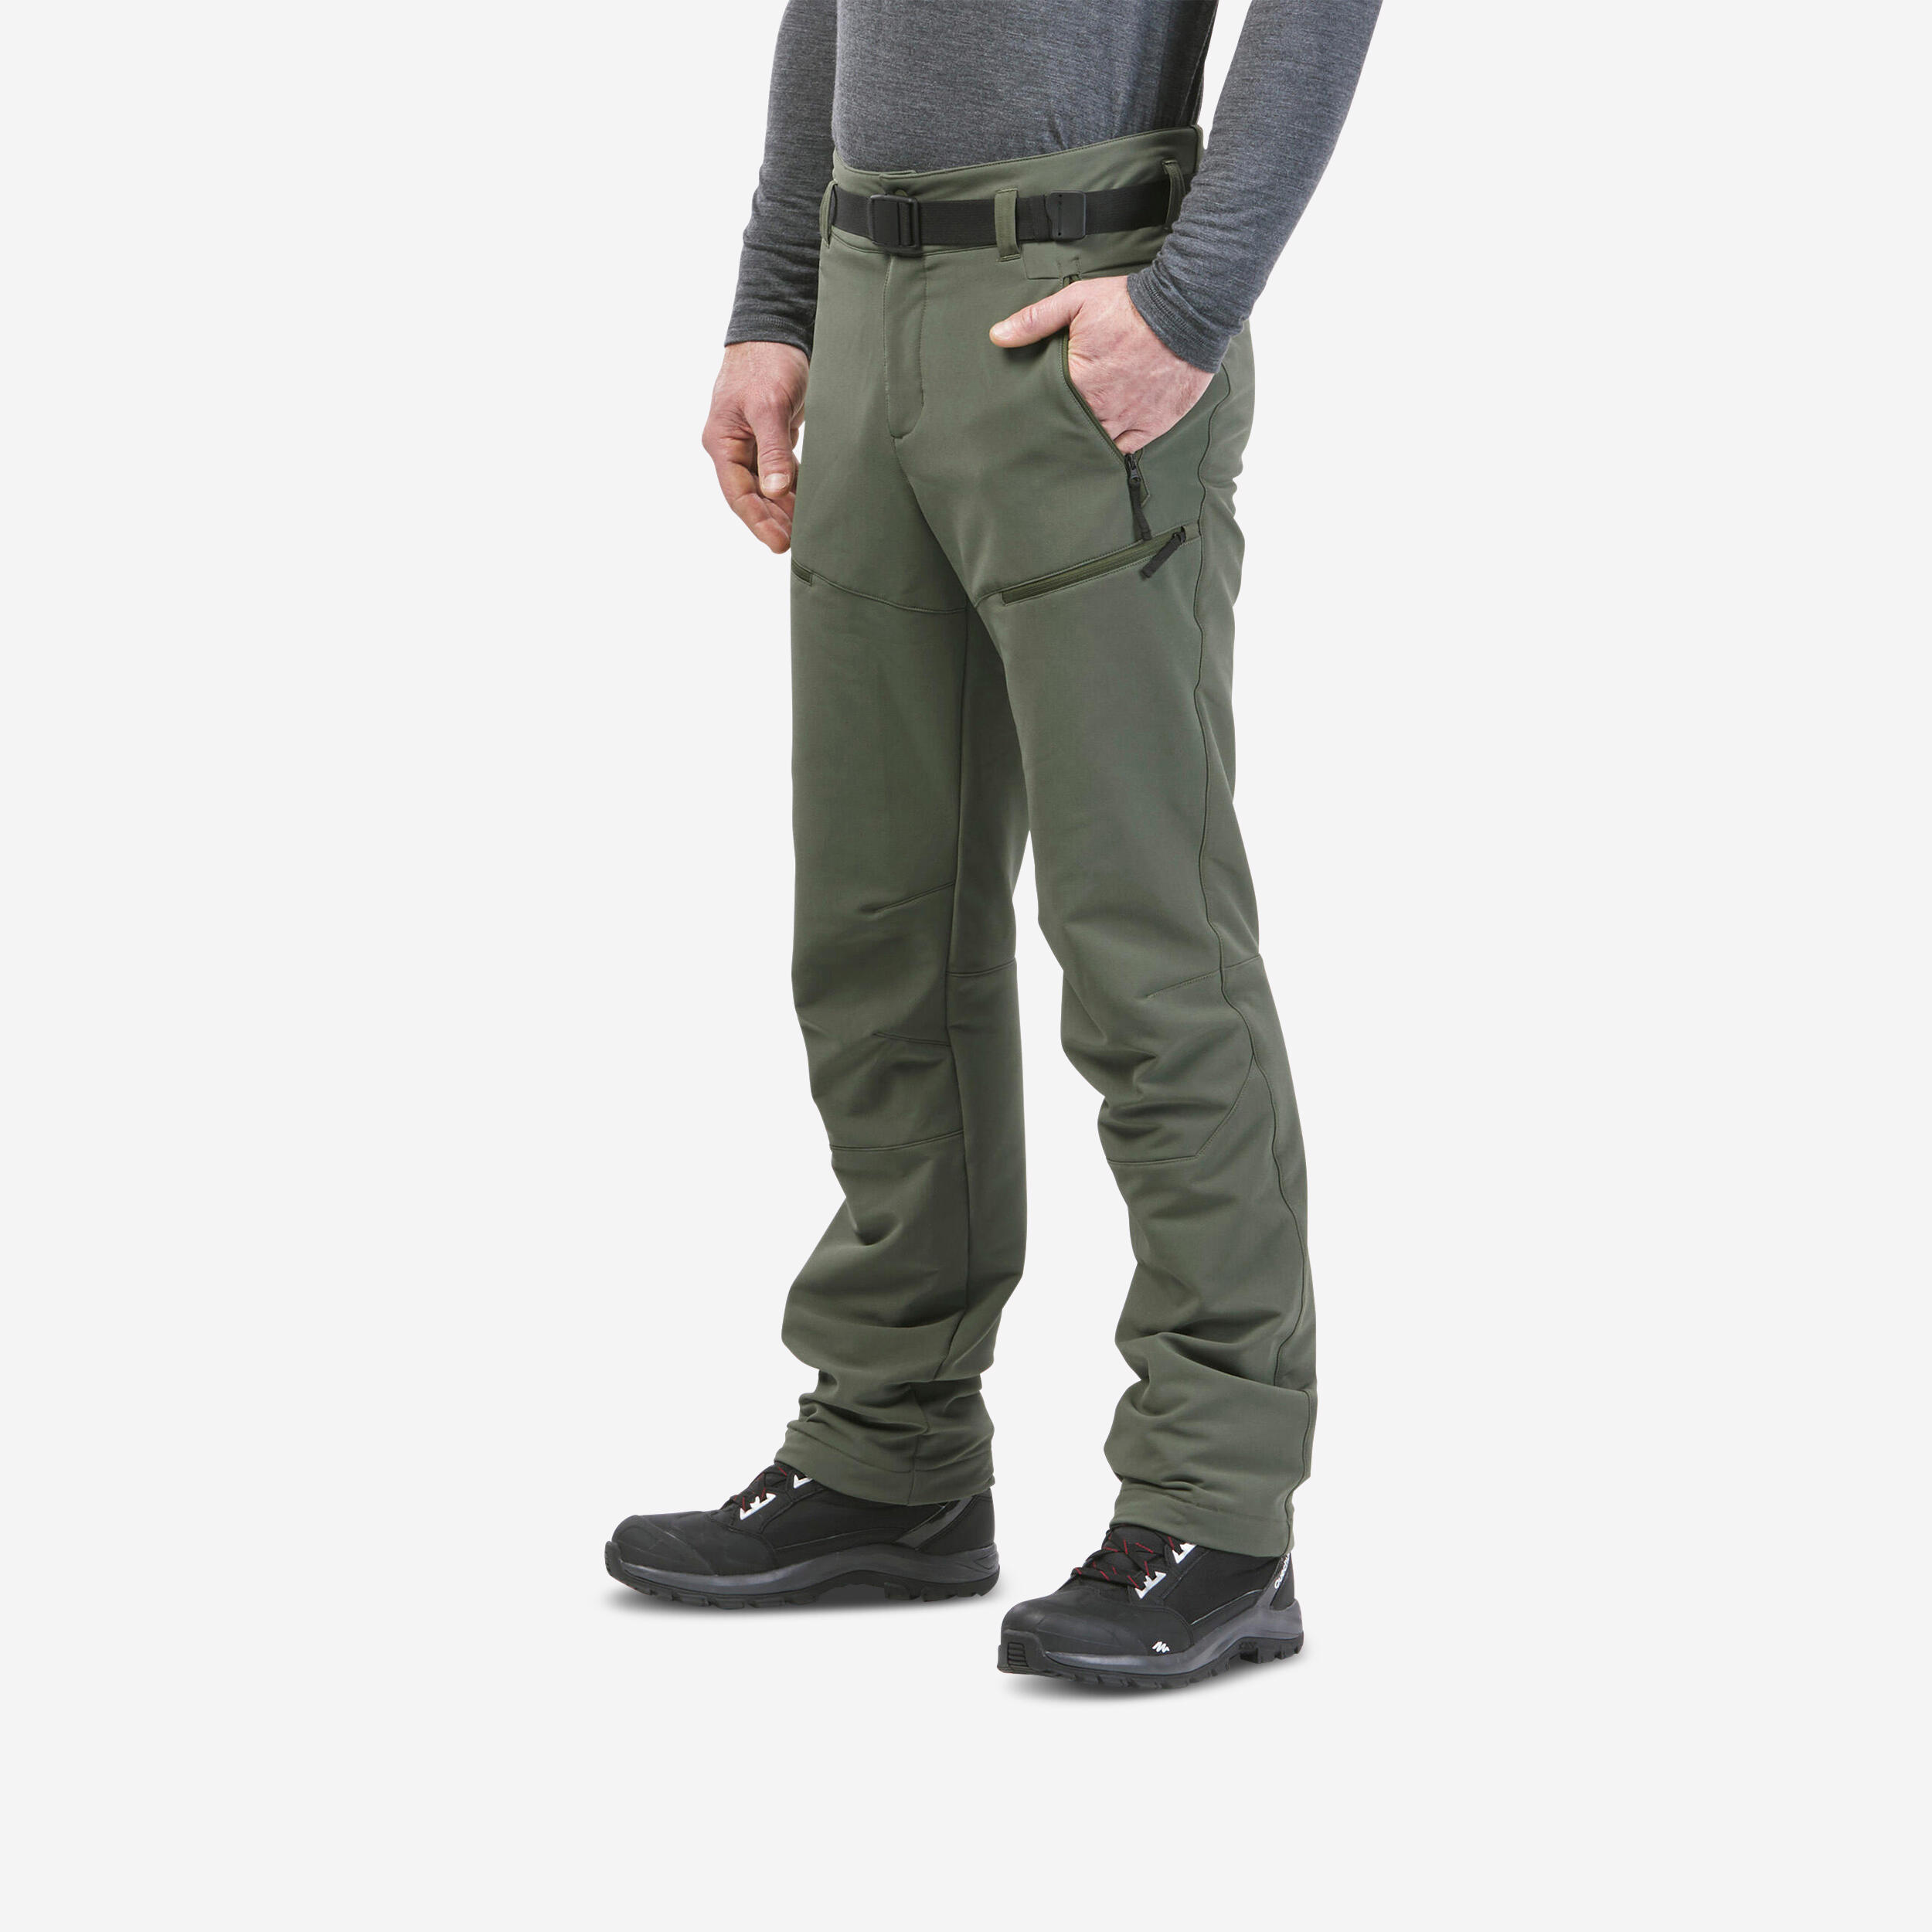 Quechua Men's Warm Water-repellent Snow Hiking Trousers - Sh500 Mountain